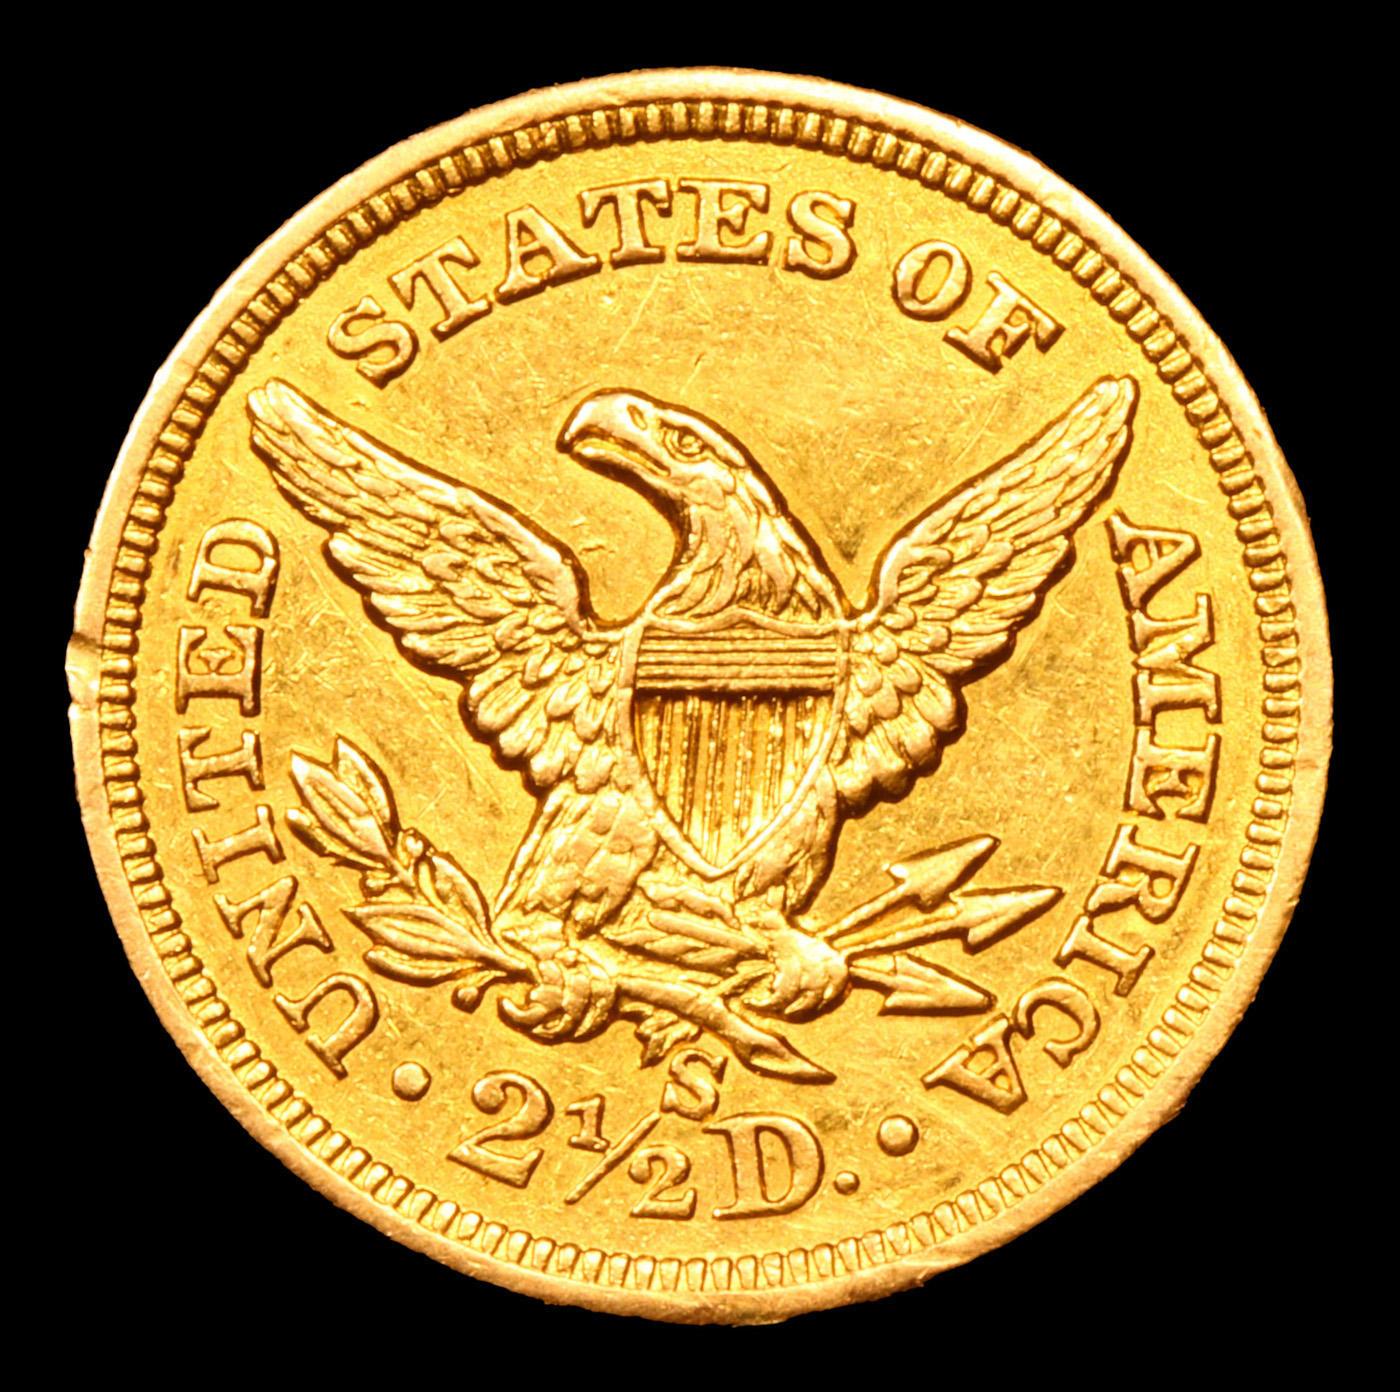 ***Auction Highlight*** 1863-s Gold Liberty Quarter Eagle 2.5 Graded ms62+ By SEGS (fc)